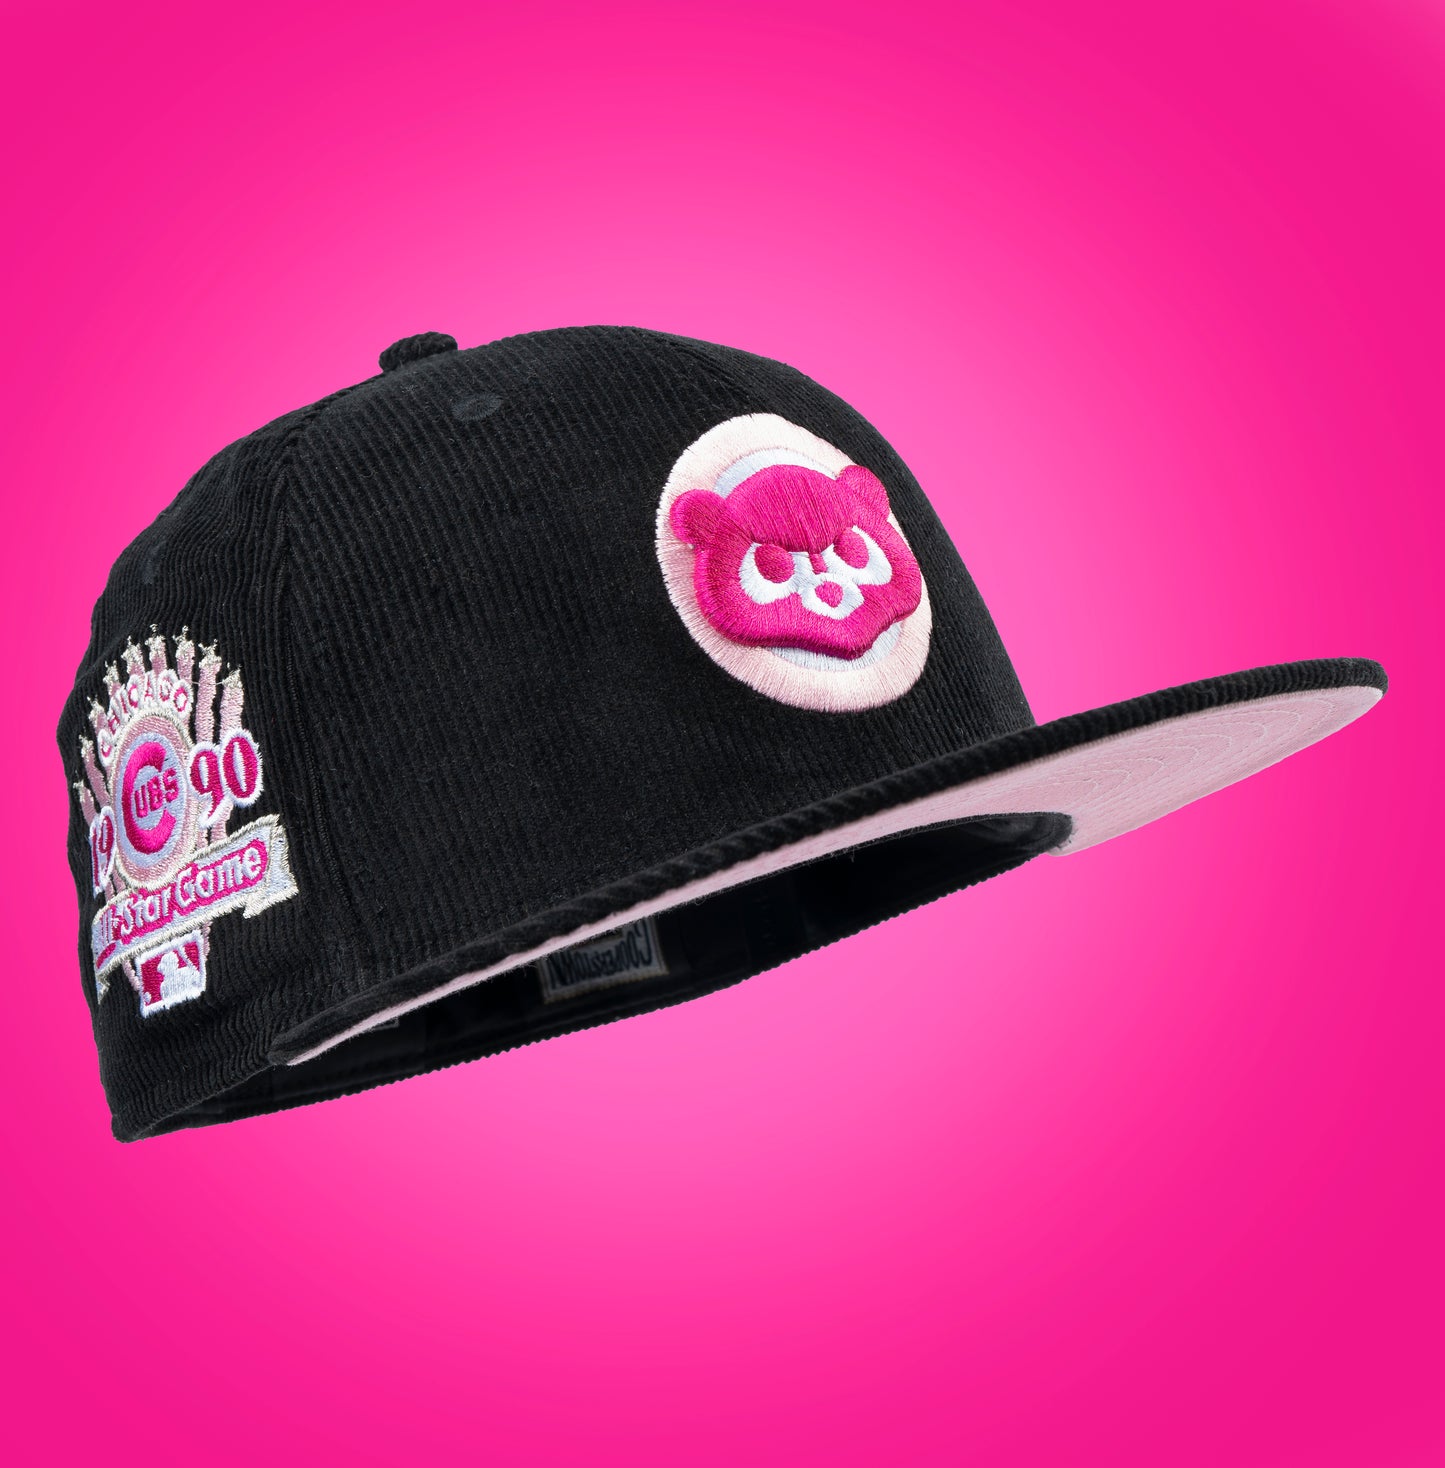 CHICAGO CUBS "PINK BOTTOM" NEW ERA 59FIFTY HAT